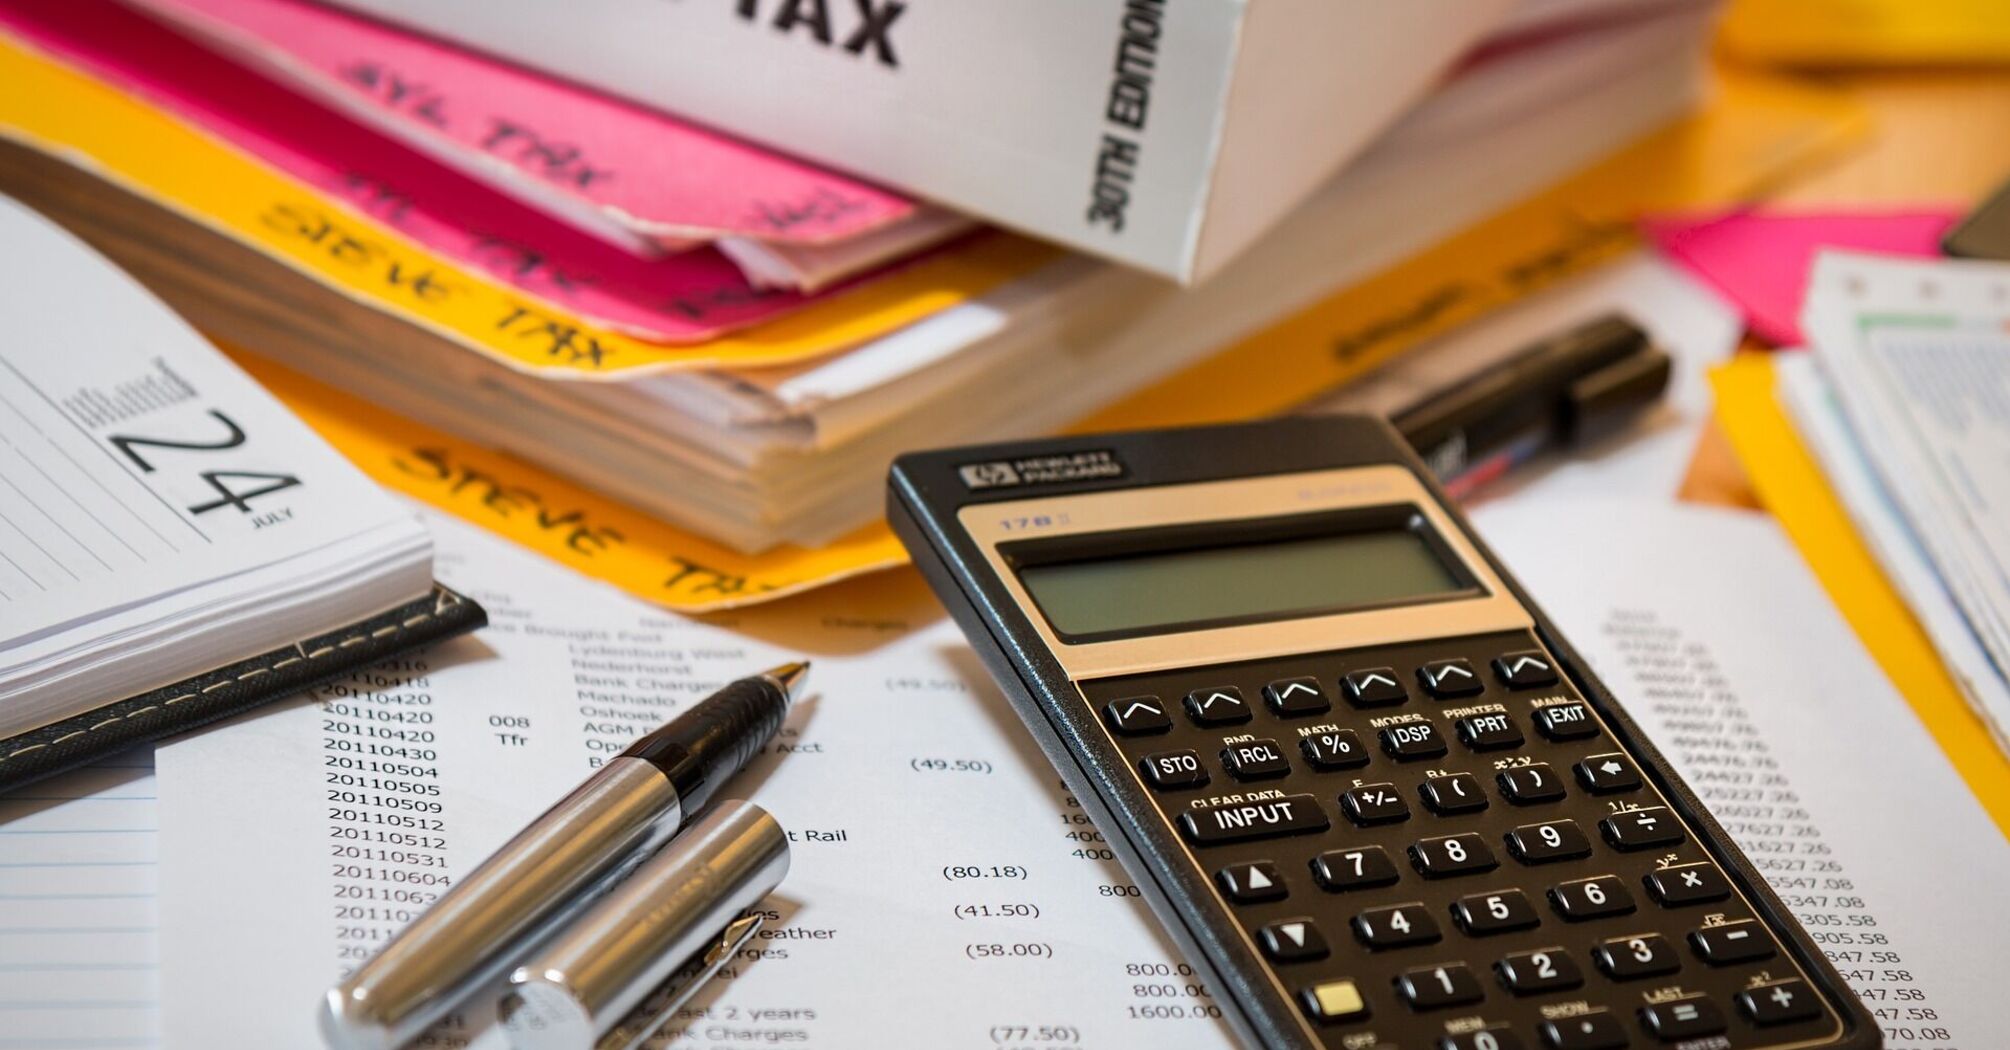 An array of income tax documents, calculator, and pens on a table